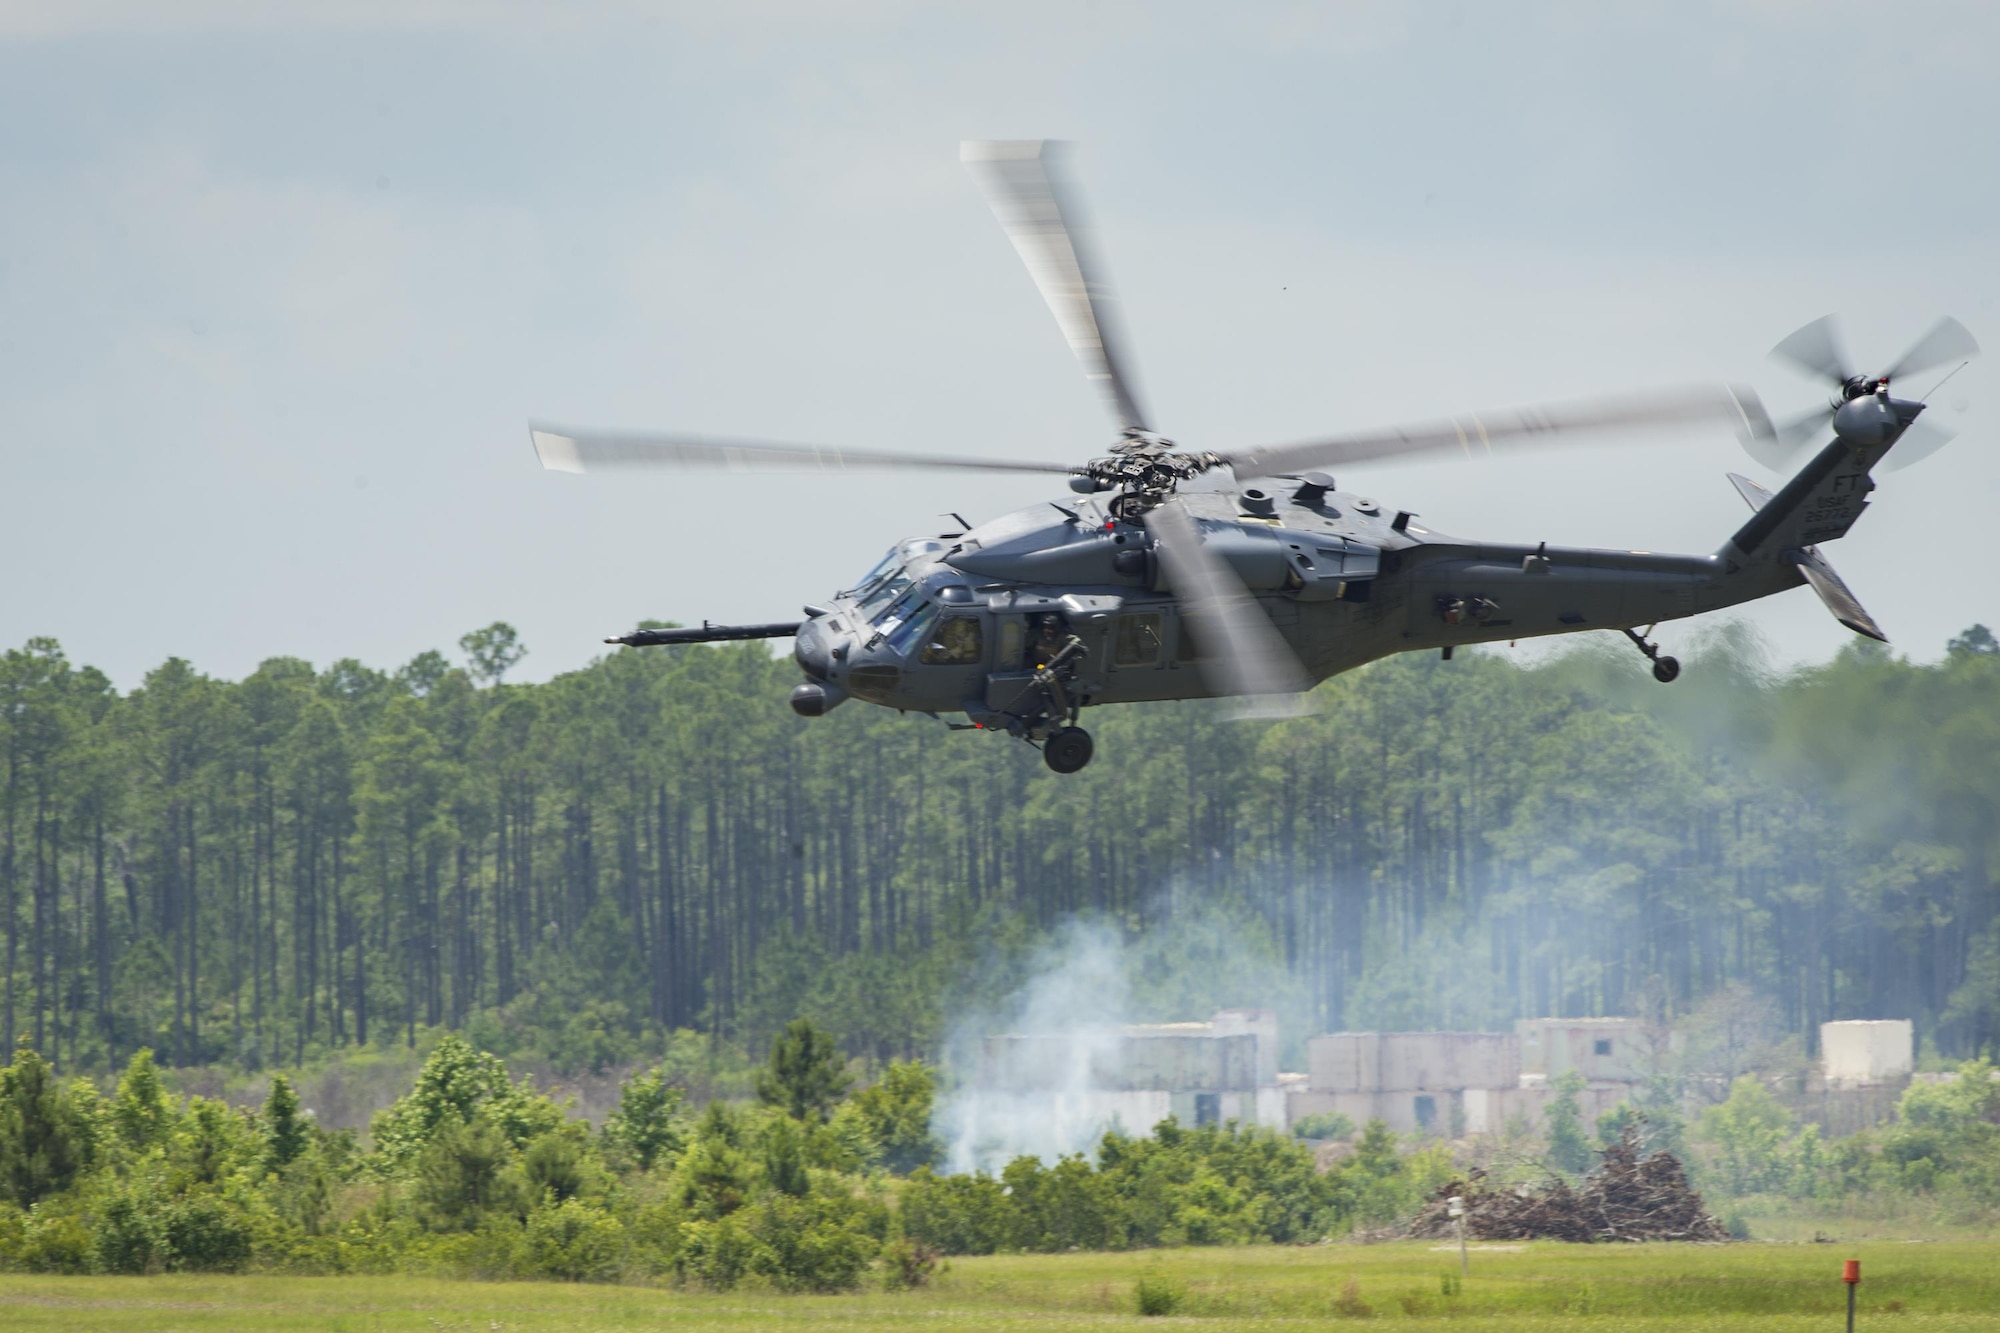 An HH-60G Pave Hawk maneuvers over Grand Bay Bombing and Gunnery Range at Moody Air Force Base, Ga., May 19, 2016. Multiple U.S. Air Force aircraft within Air Combat Command conducted joint aerial training showcasing the aircraft’s tactical air and ground maneuvers, as well as its weapons capabilities. (U.S. Air Force photo by Airman Daniel Snider/Released)
